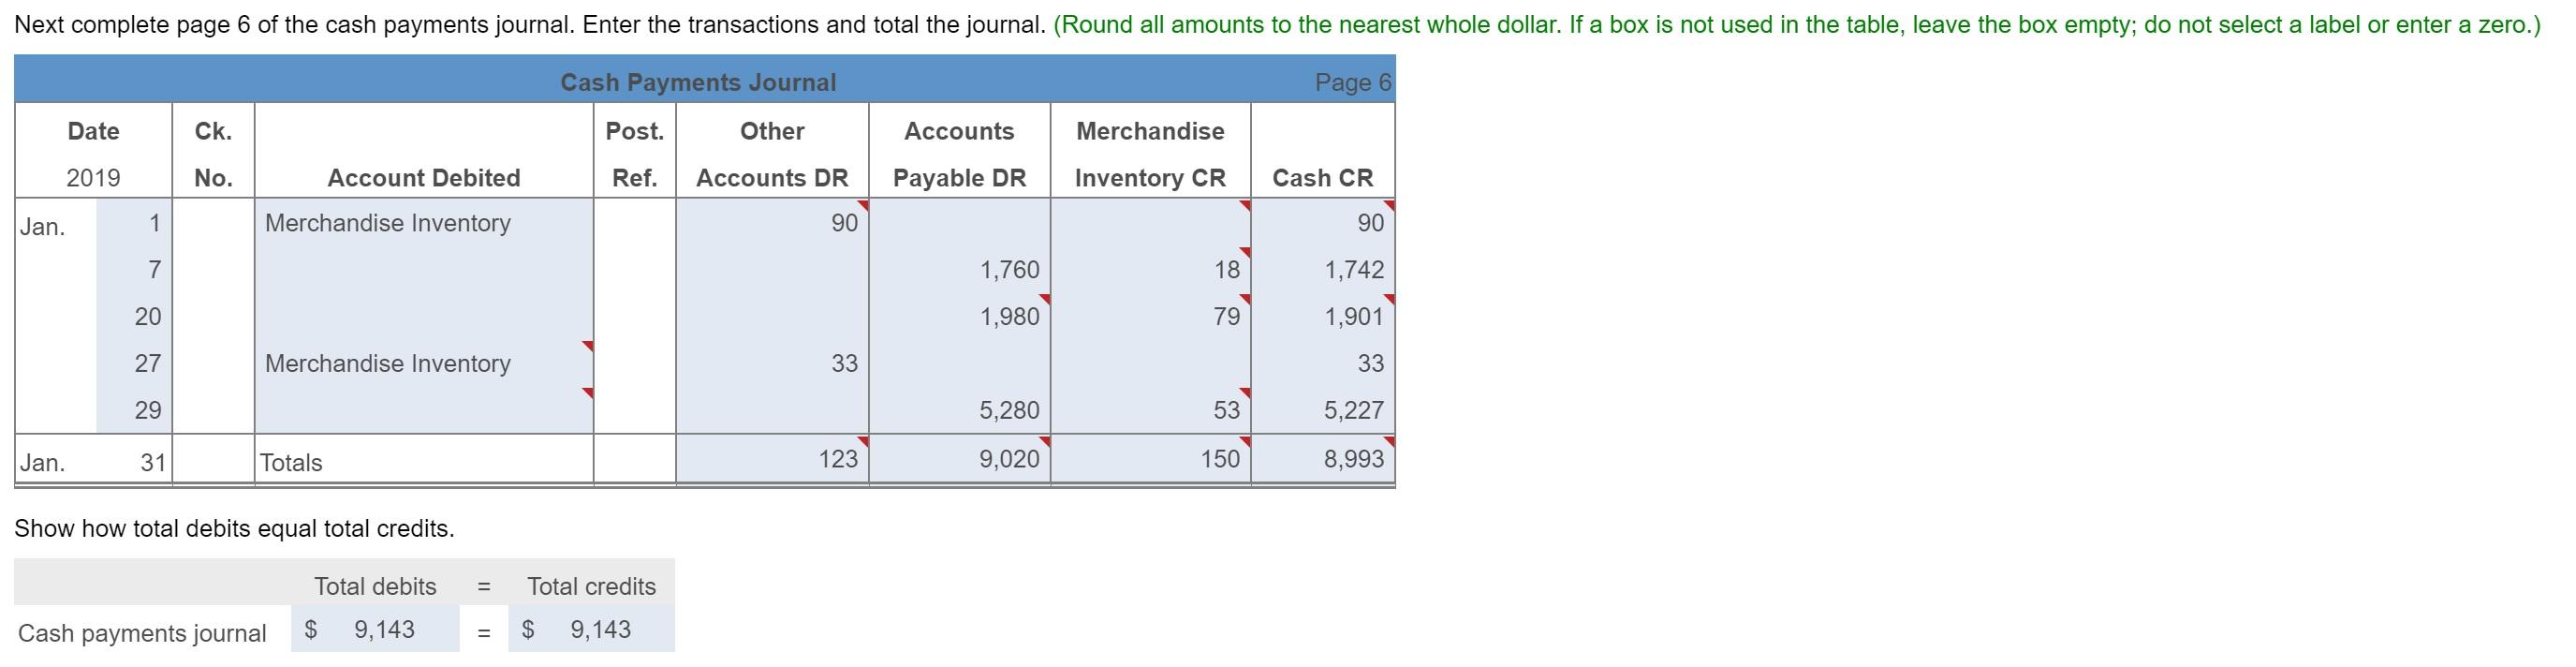 Next complete page 6 of the cash payments journal. Enter the transactions and total the journal. (Round all amounts to the ne